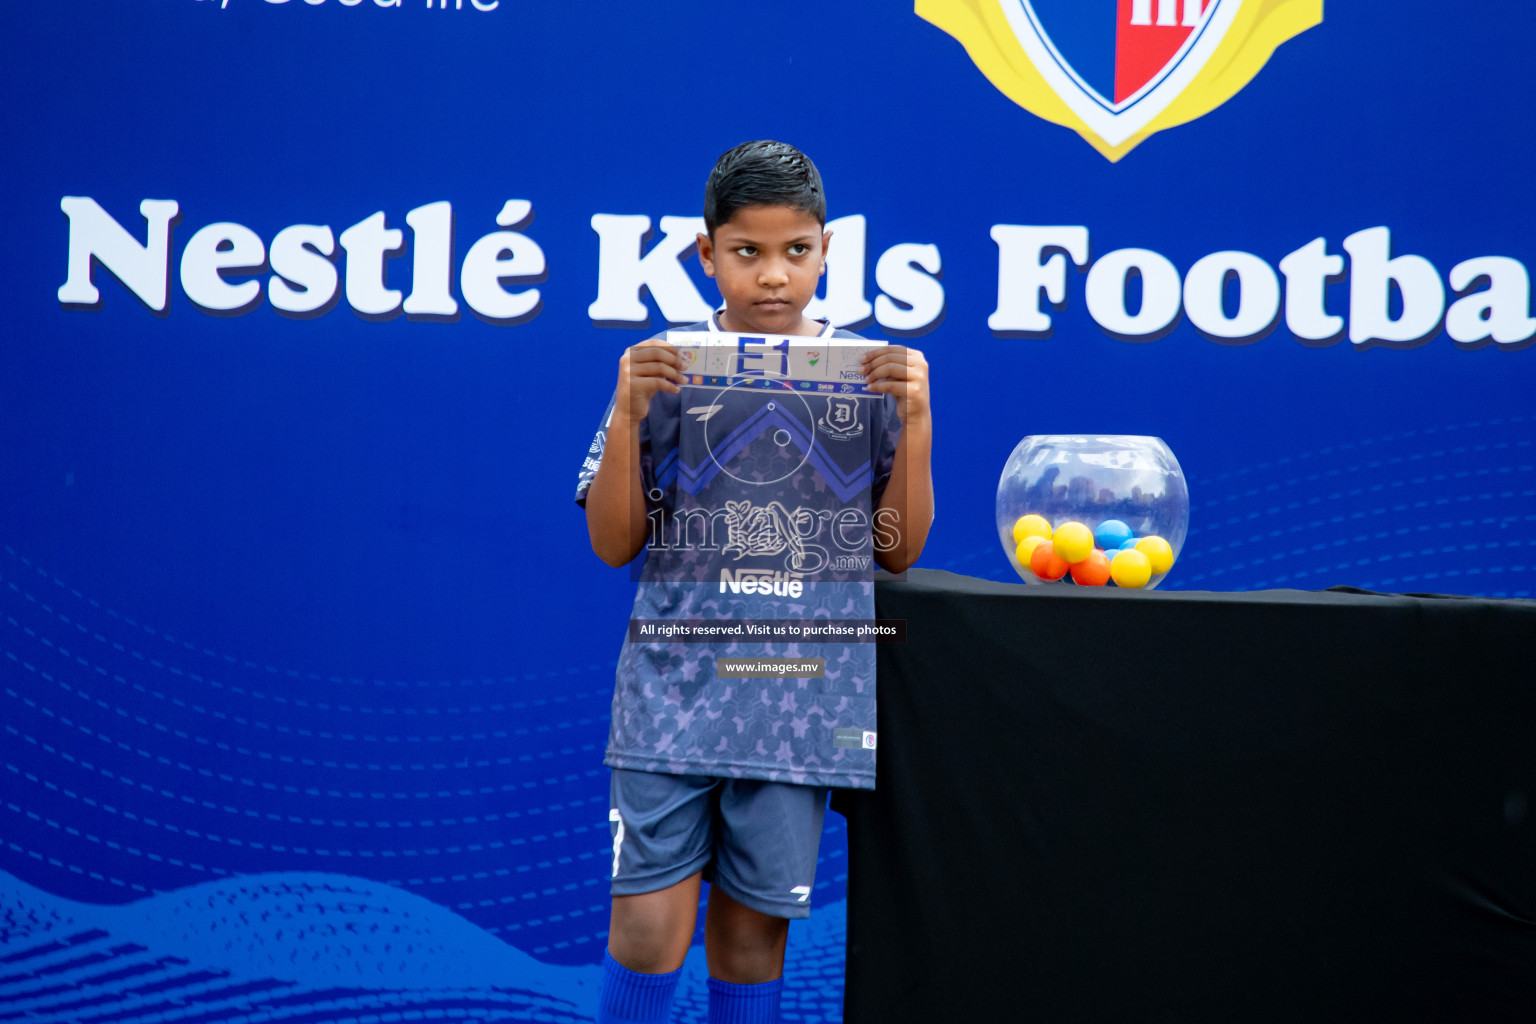 Draw Ceremony of Nestle' Kids Football Fiesta 2023 held in Artificial Beach, Male', Maldives on Saturday, 7th October 2023